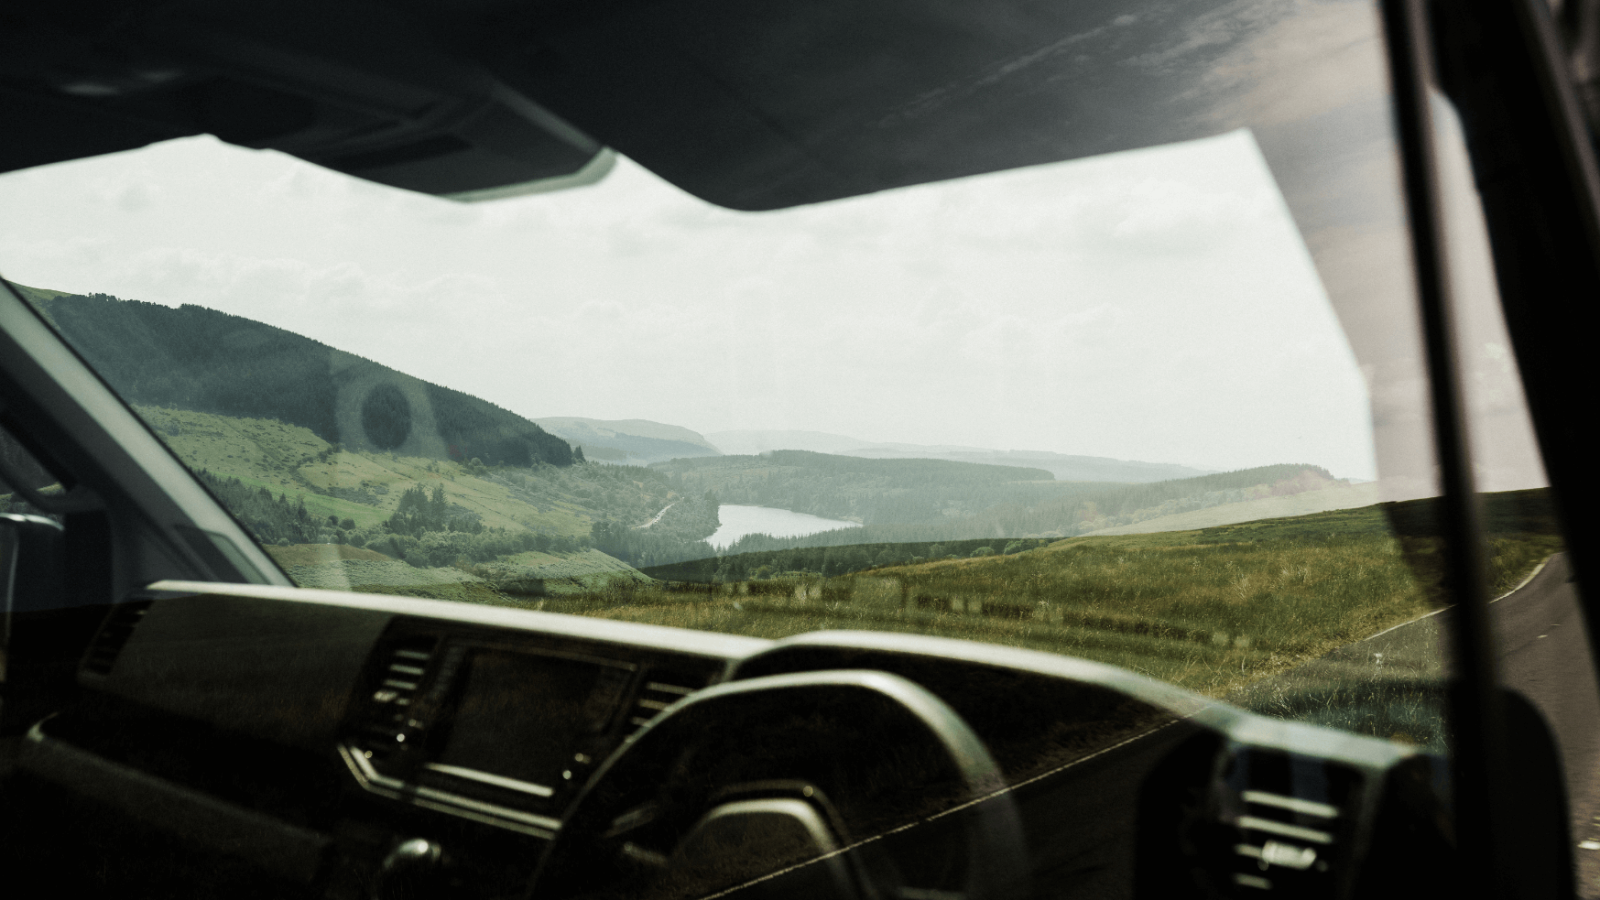 View from inside a car overlooking a scenic landscape featuring rolling hills and a winding river, with the dashboard displaying brand design visible in the foreground.